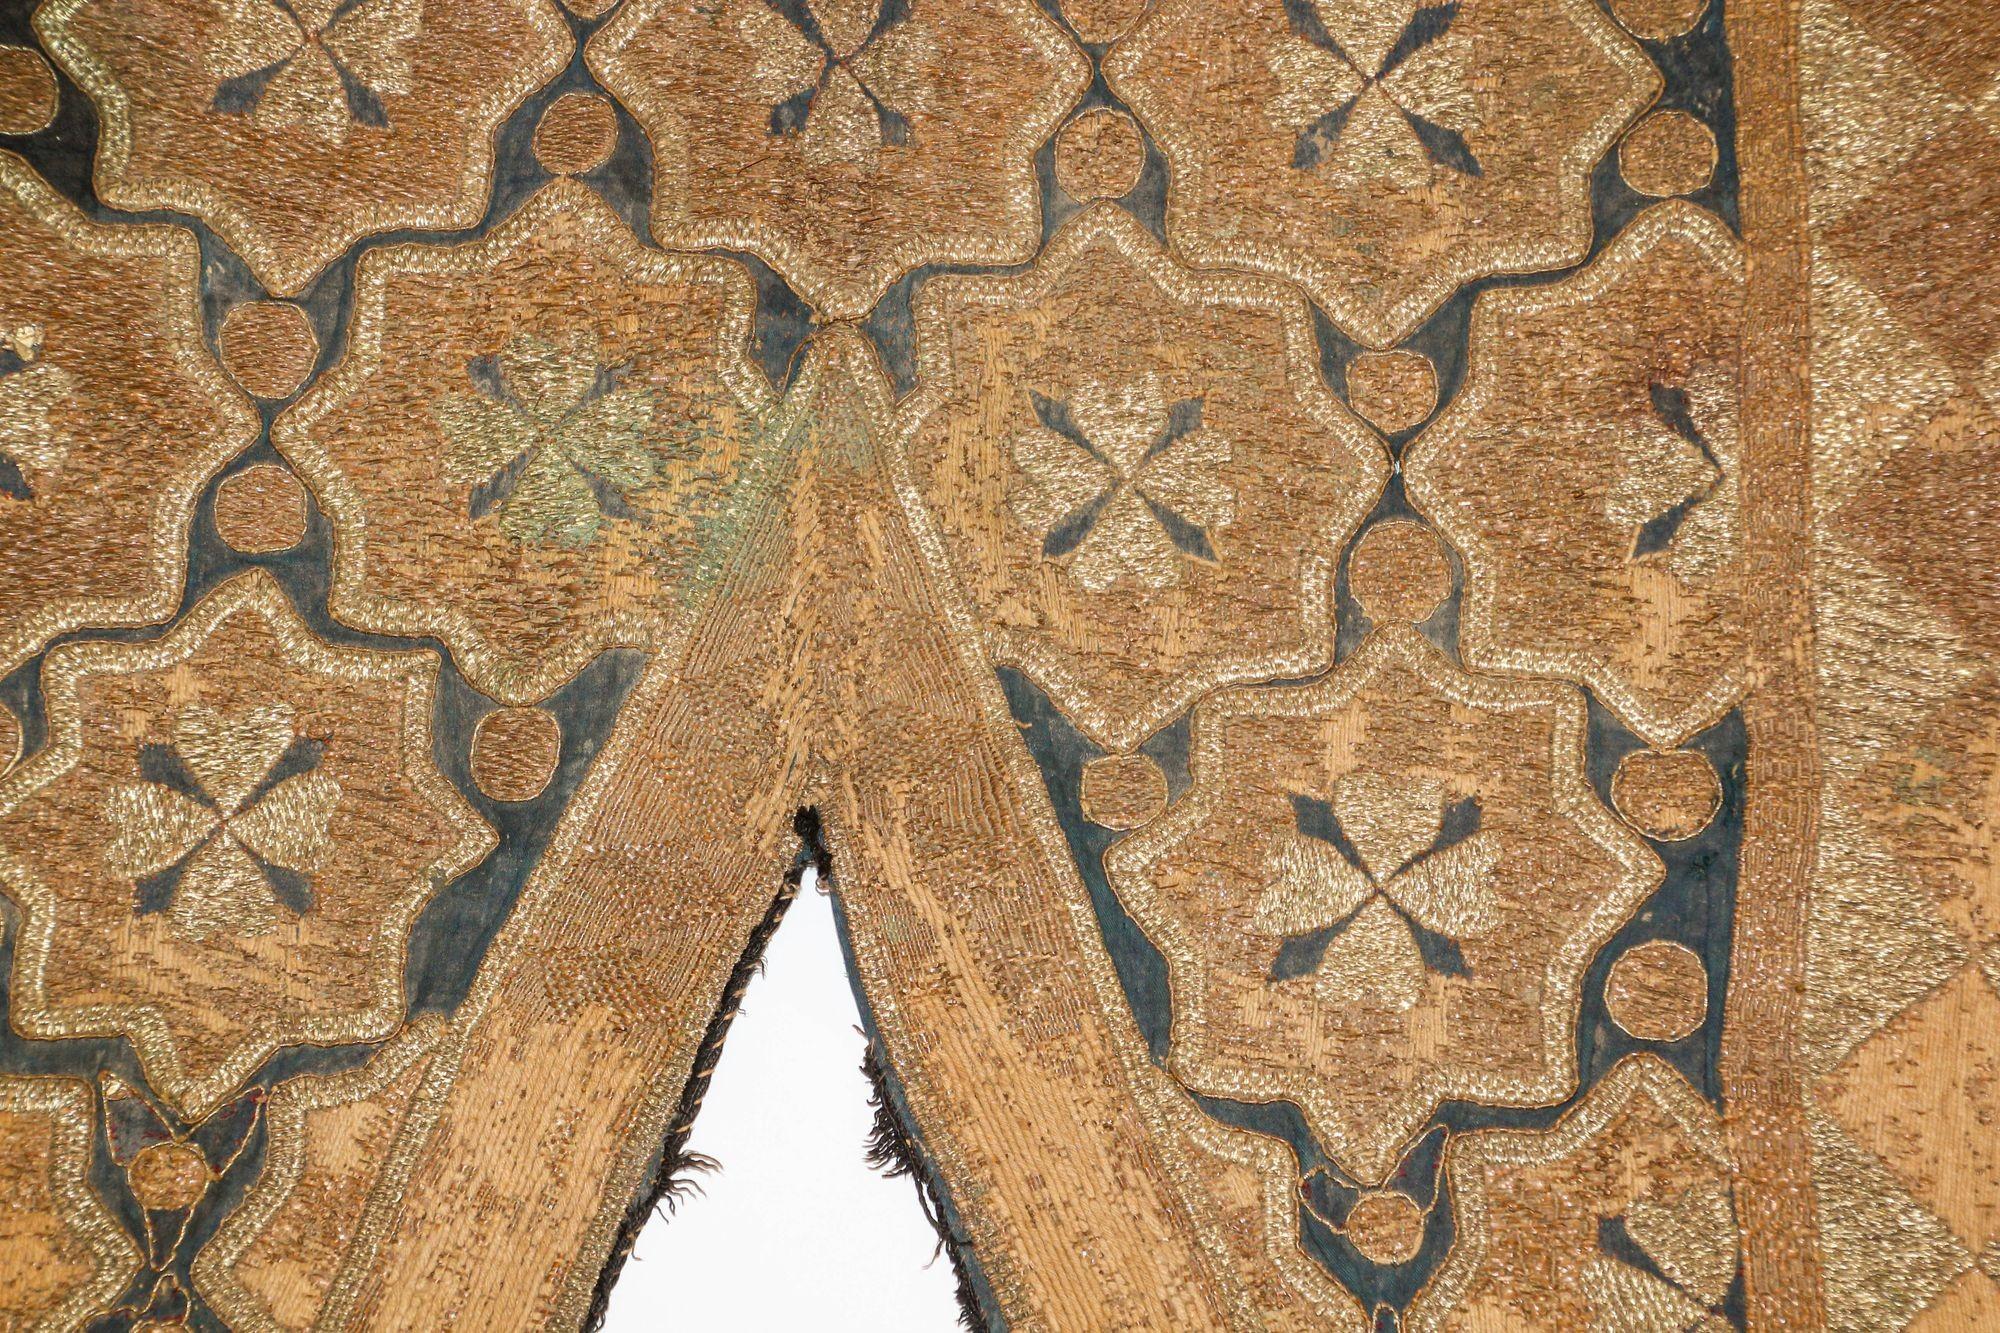 19th Century Islamic Art Ottoman Metallic Threads Arched Fragment Textile In Fair Condition For Sale In North Hollywood, CA